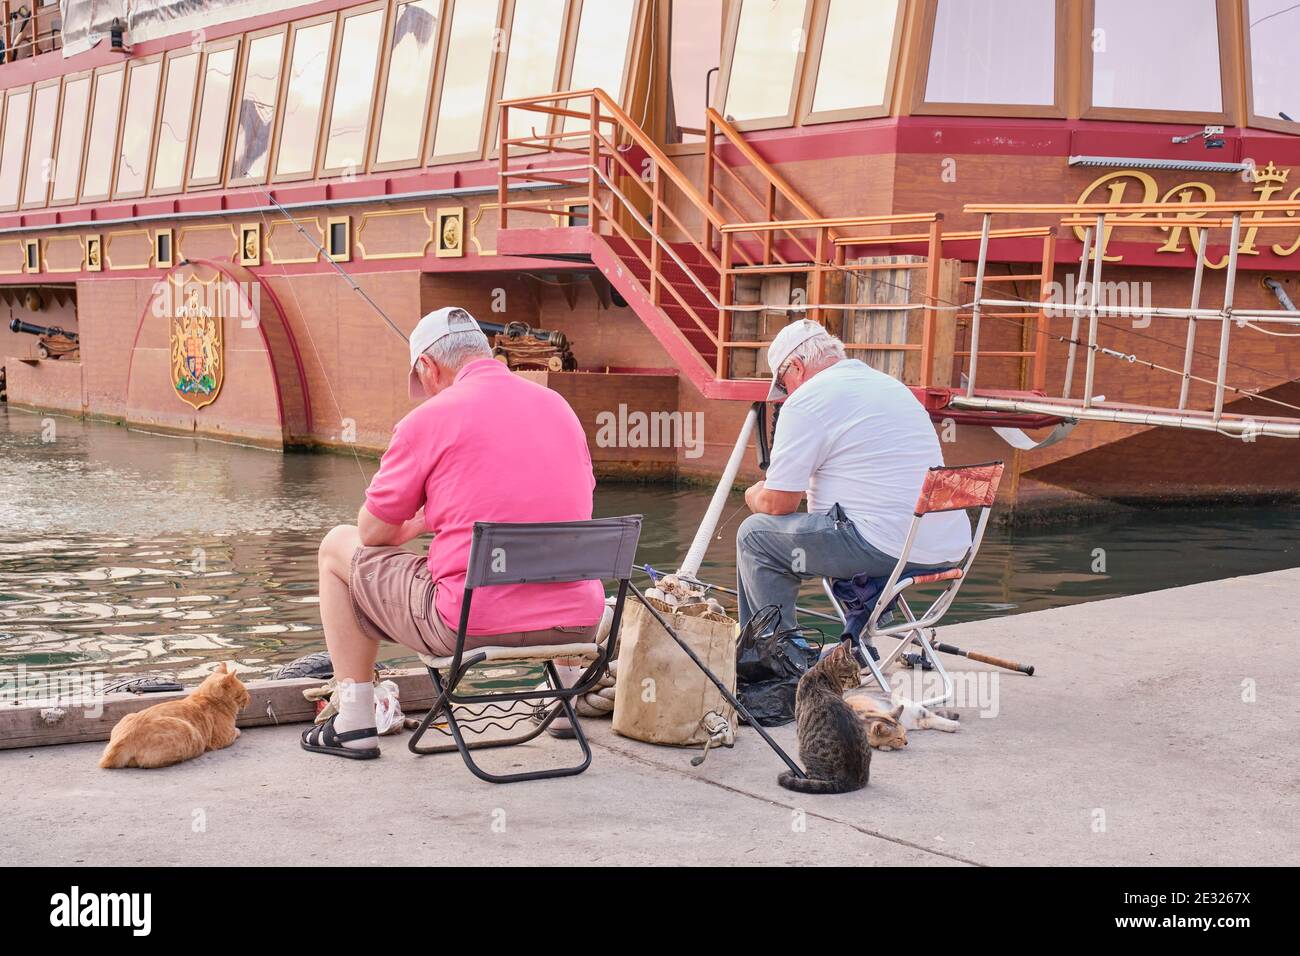 Sevastopol, Russia - January 7, 2020: Two male fishermen in casual clothes sit on folding chairs on the dock and fish. Several cute cats nearby are wa Stock Photo